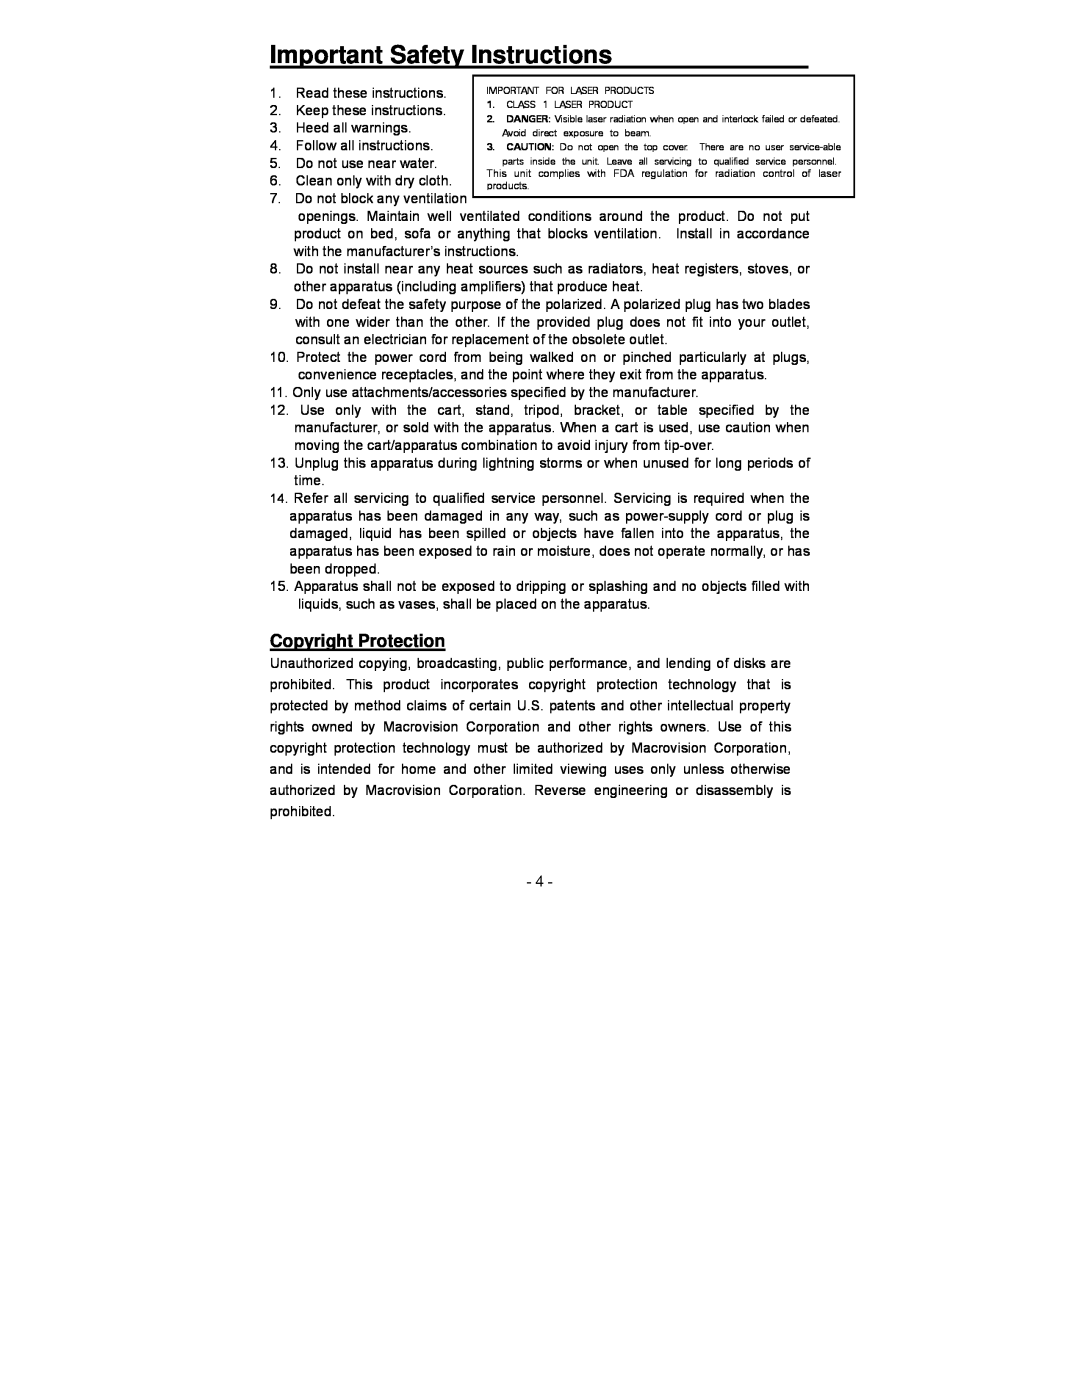 Polaroid PDV-0713A operation manual Copyright Protection, Important Safety Instructions 